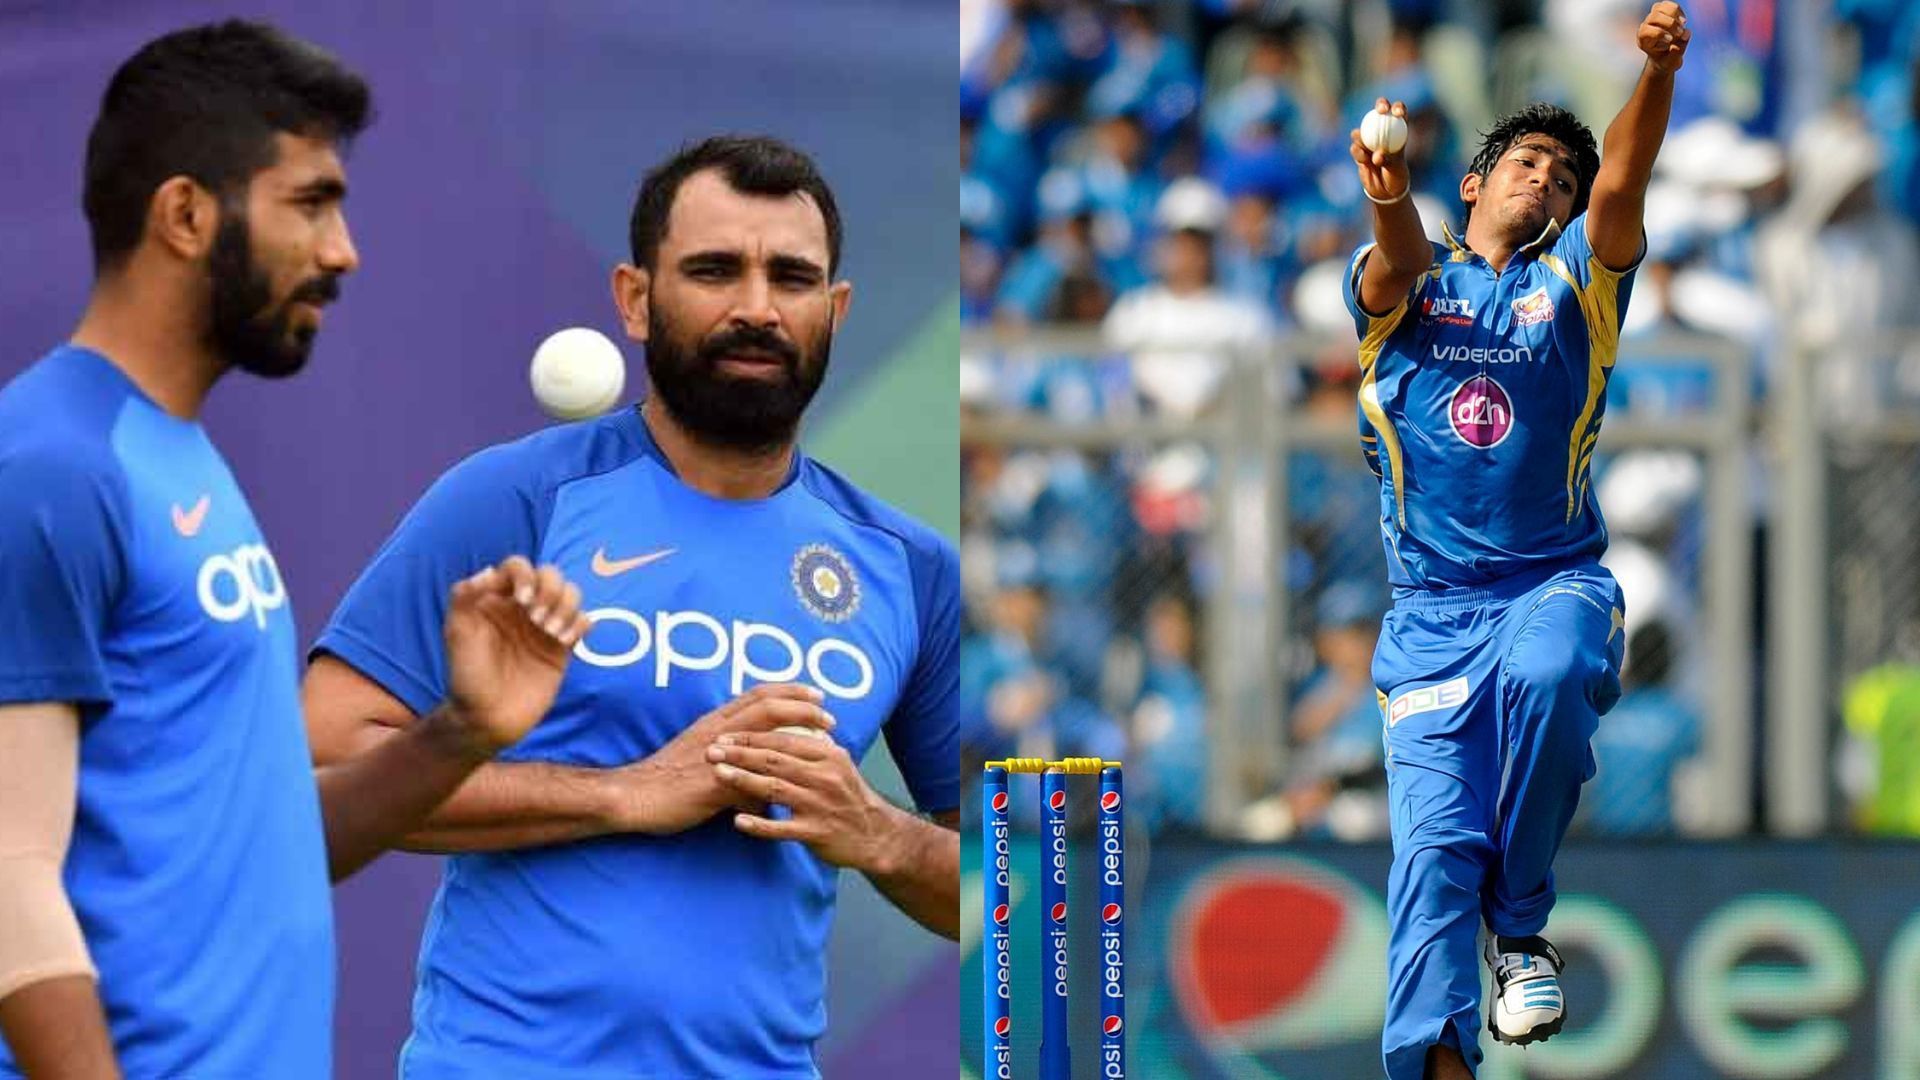 Indian pacer Mohammed Shami has opened up about how he felt on seeing Jasprit Bumrah bowl for the first time in the IPL